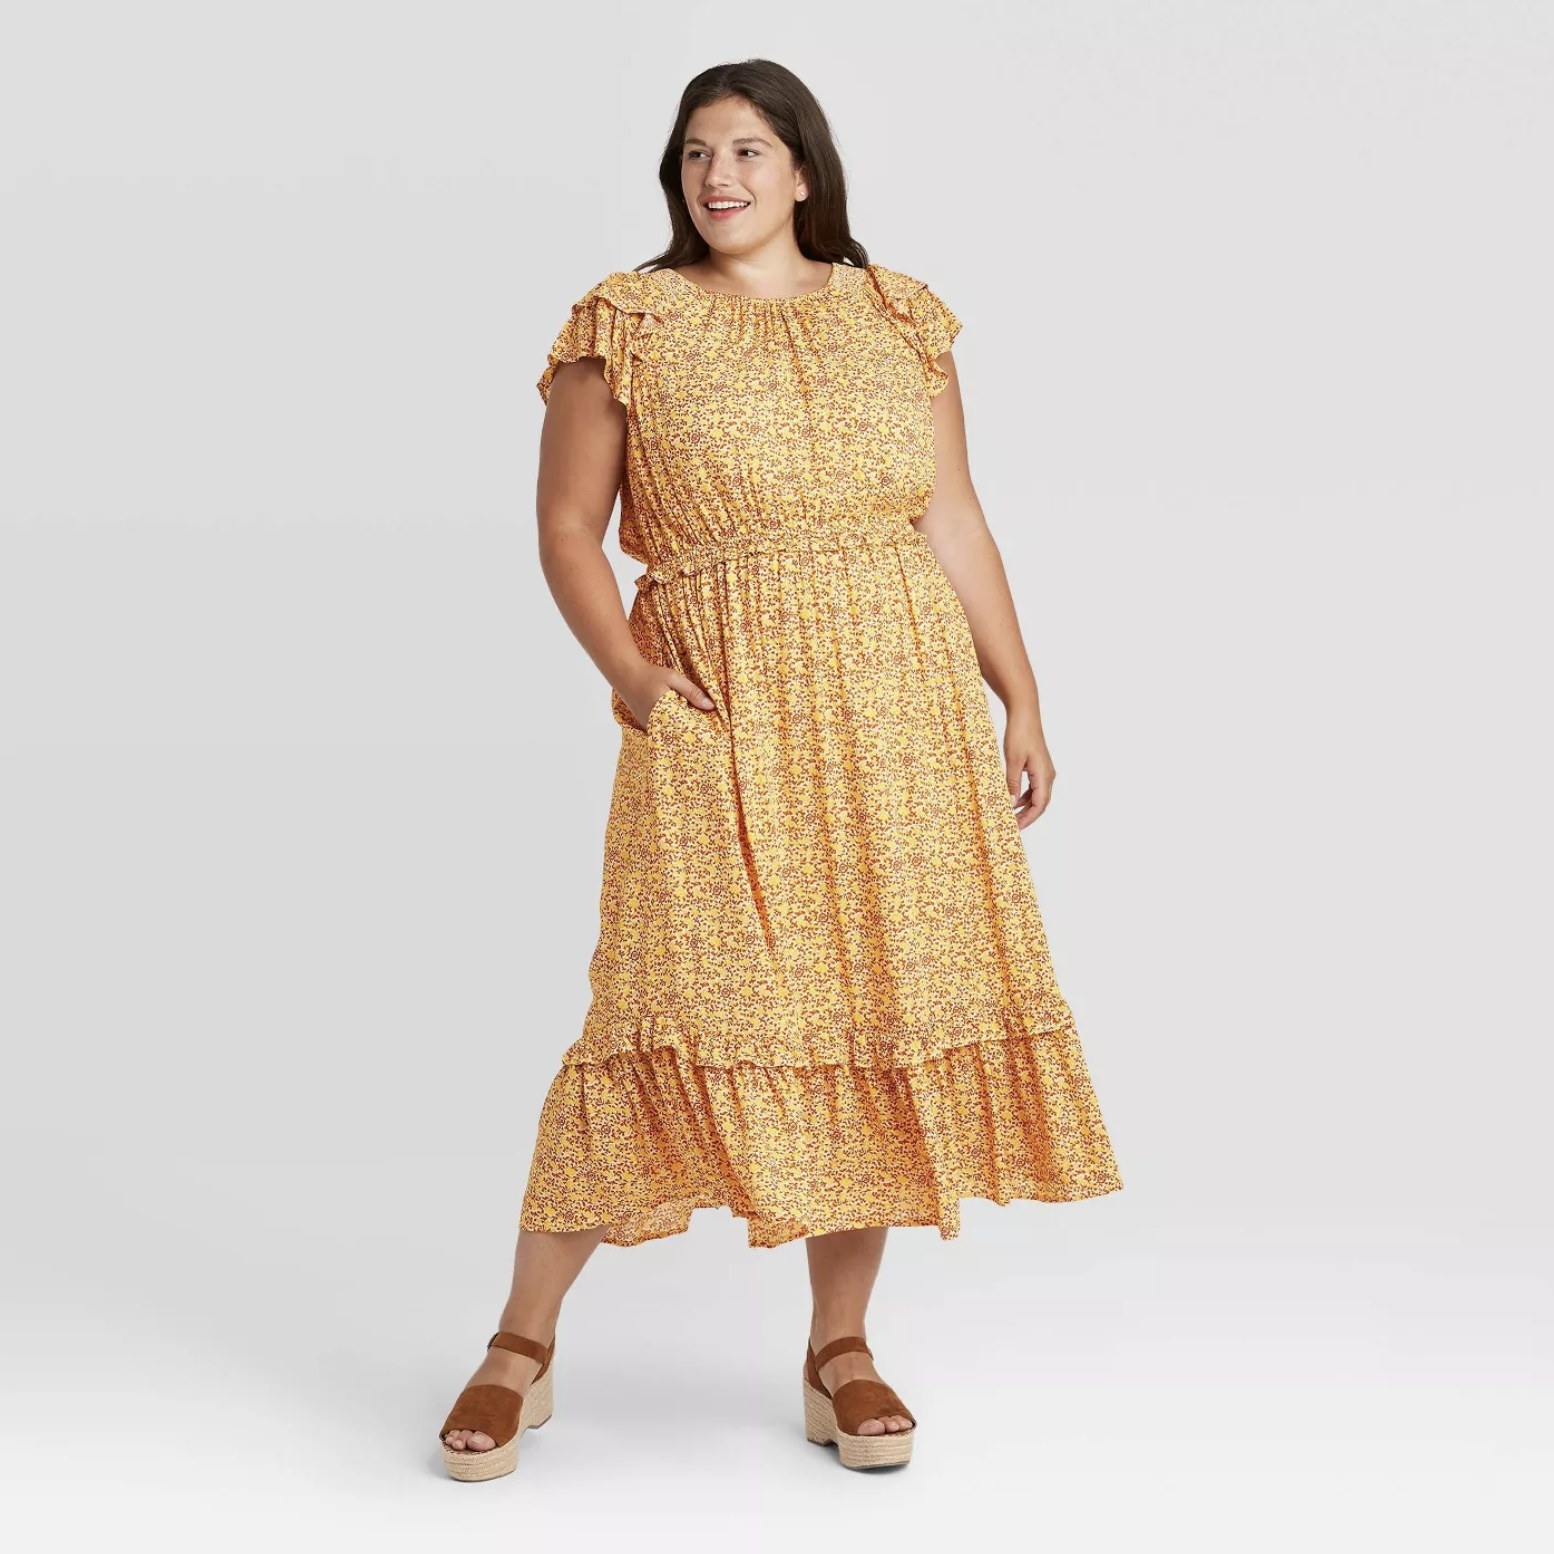 Model is wearing a yellow floral short sleeve dress with a ruffled hem and brown wedges